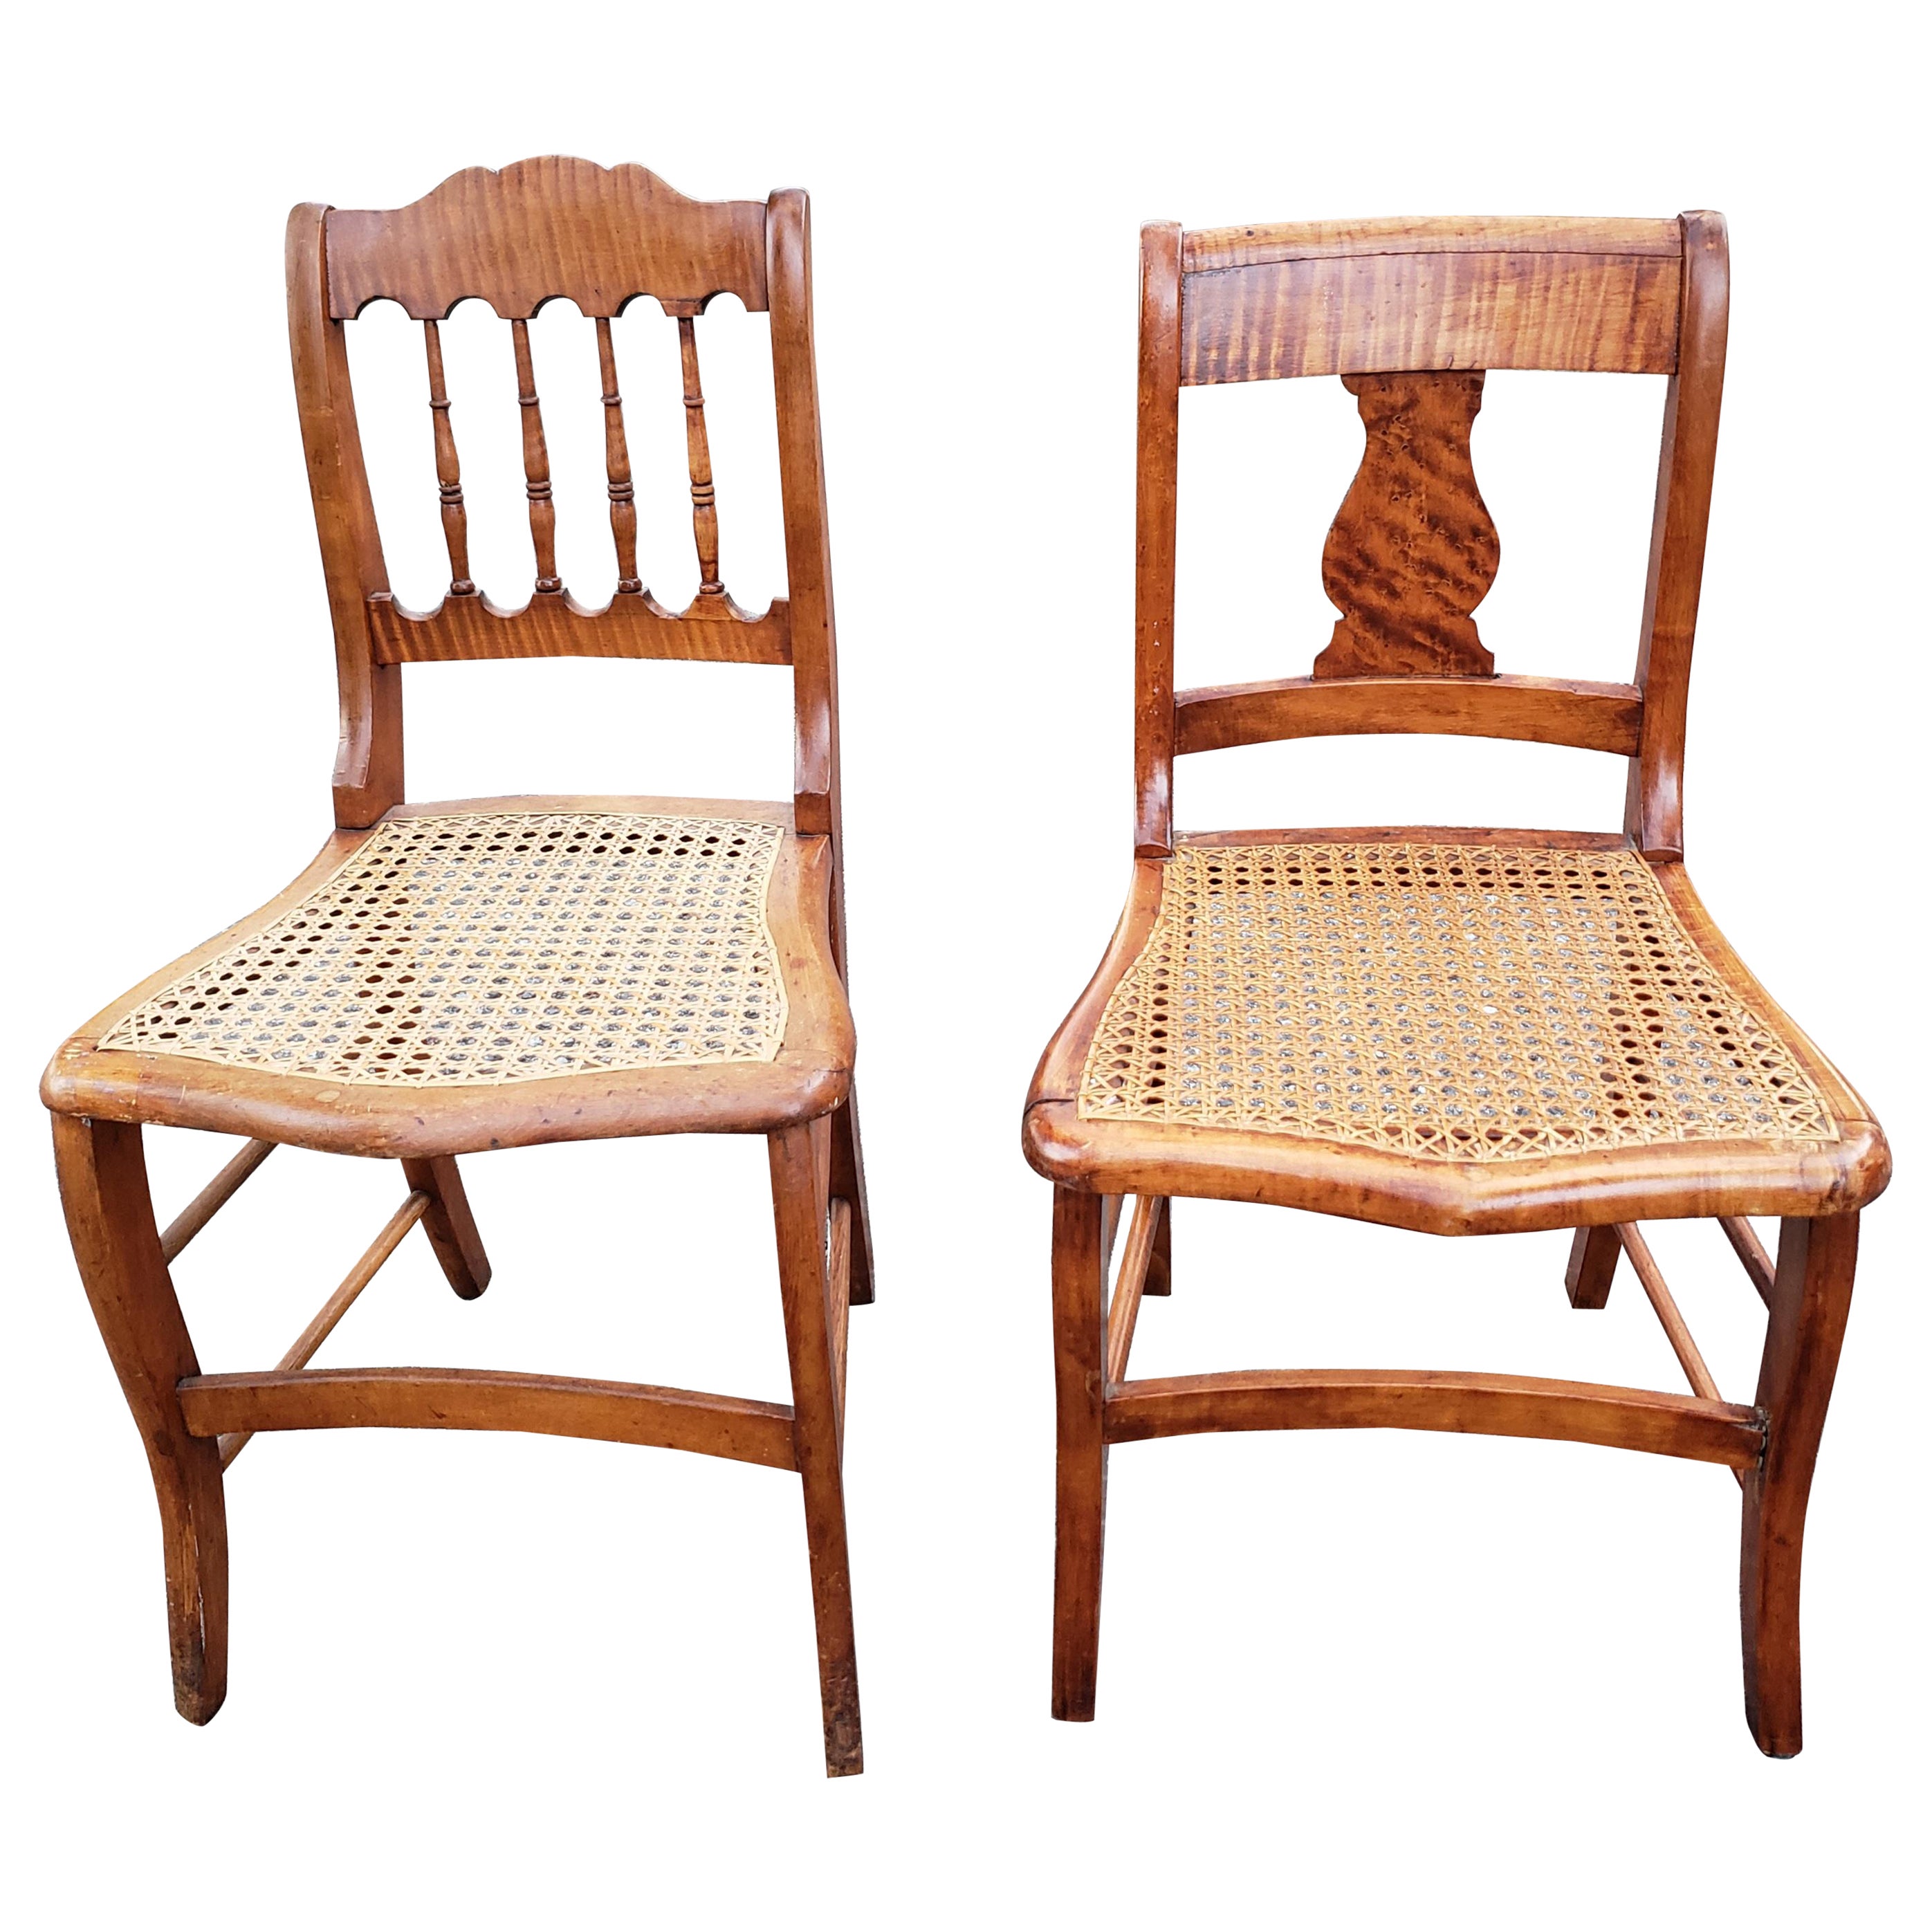 Pair of Early 20th Century Victorian Tiger Maple and Cane Seat Side Chair For Sale